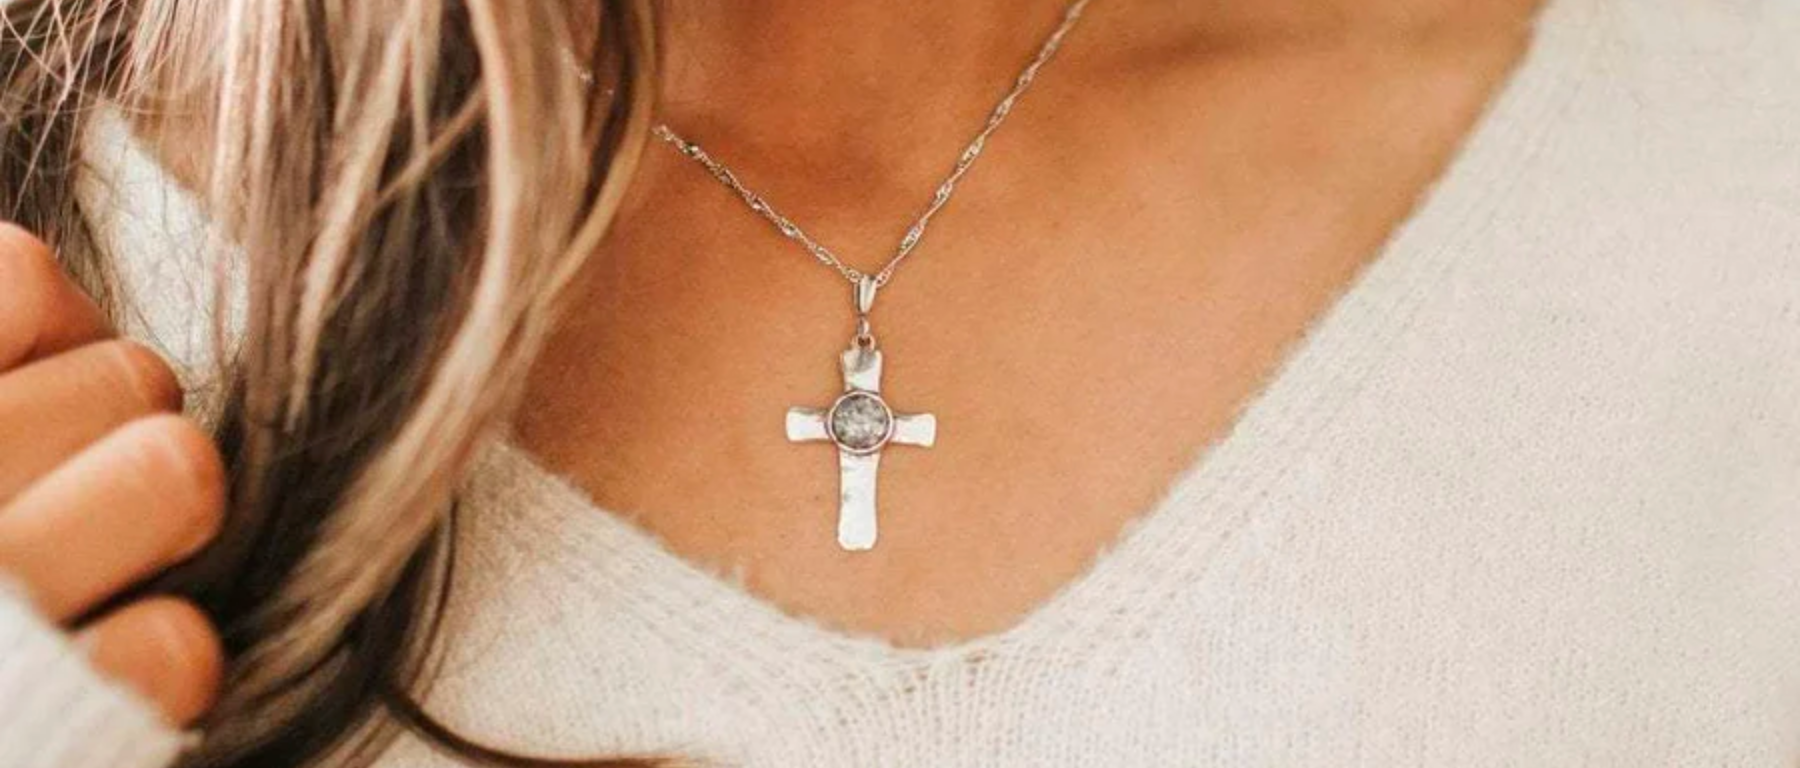 ROMAN GLASS PATINA CROSS PENDANT IN HAMMERED STERLING SILVER